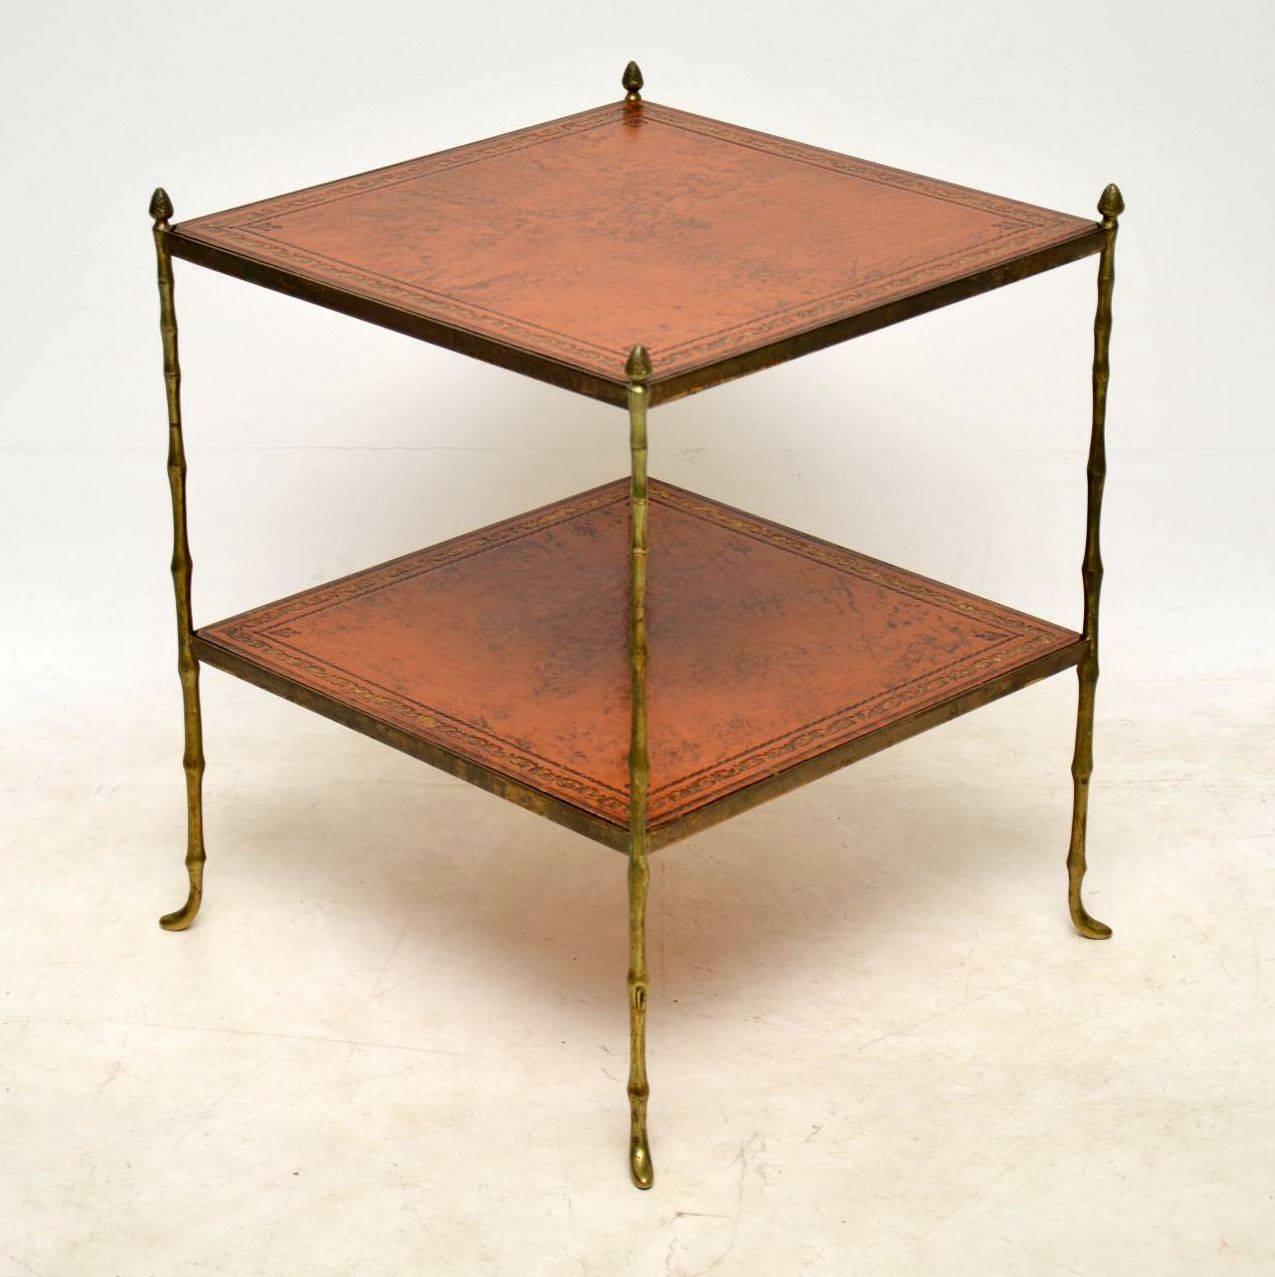 Antique brass faux bamboo two tier side table with tooled leather inserts. The brass work is naturally aged and distressed, which give this table plenty of character. It’s an unusual design and I would date this to circa 1940-1950s period. I have a